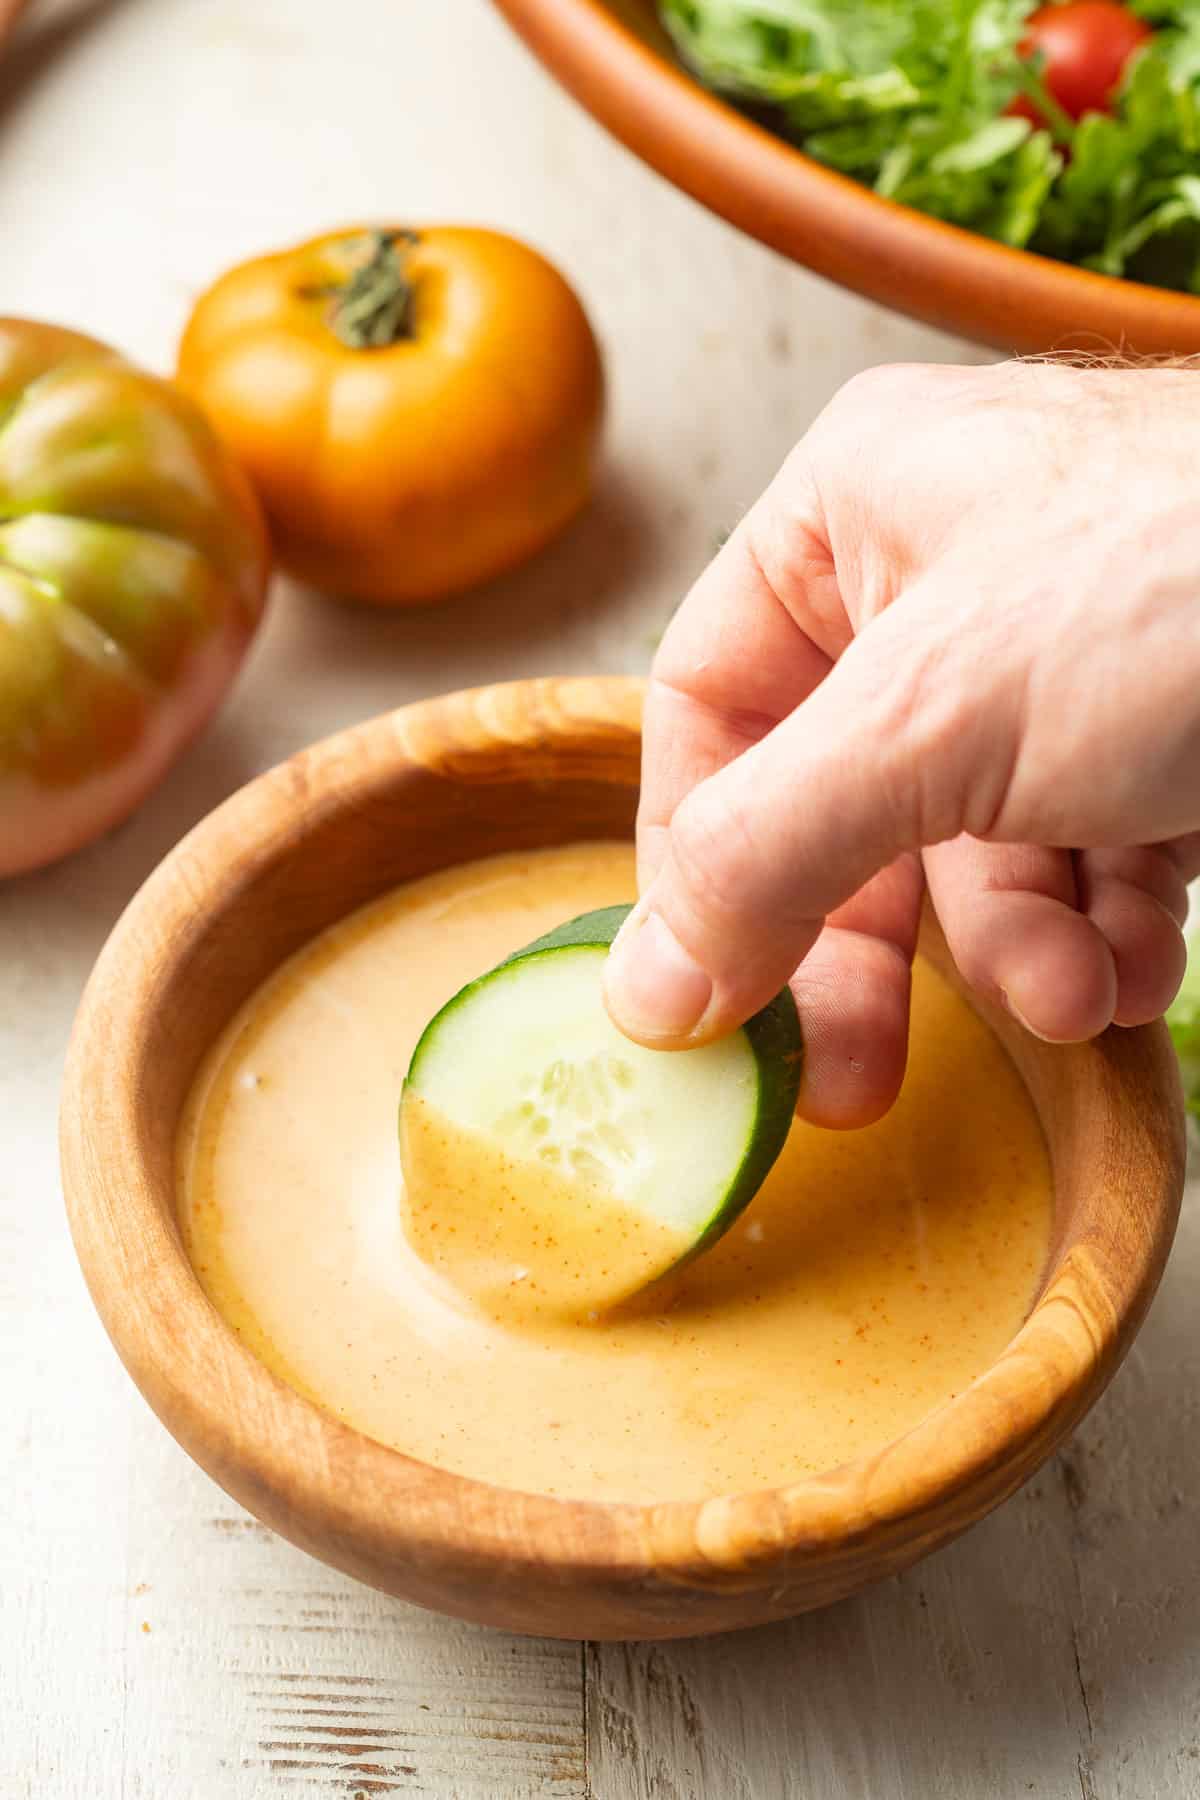 Hand dipping a cucumber slice into a bowl of Vegan Honey Mustard.